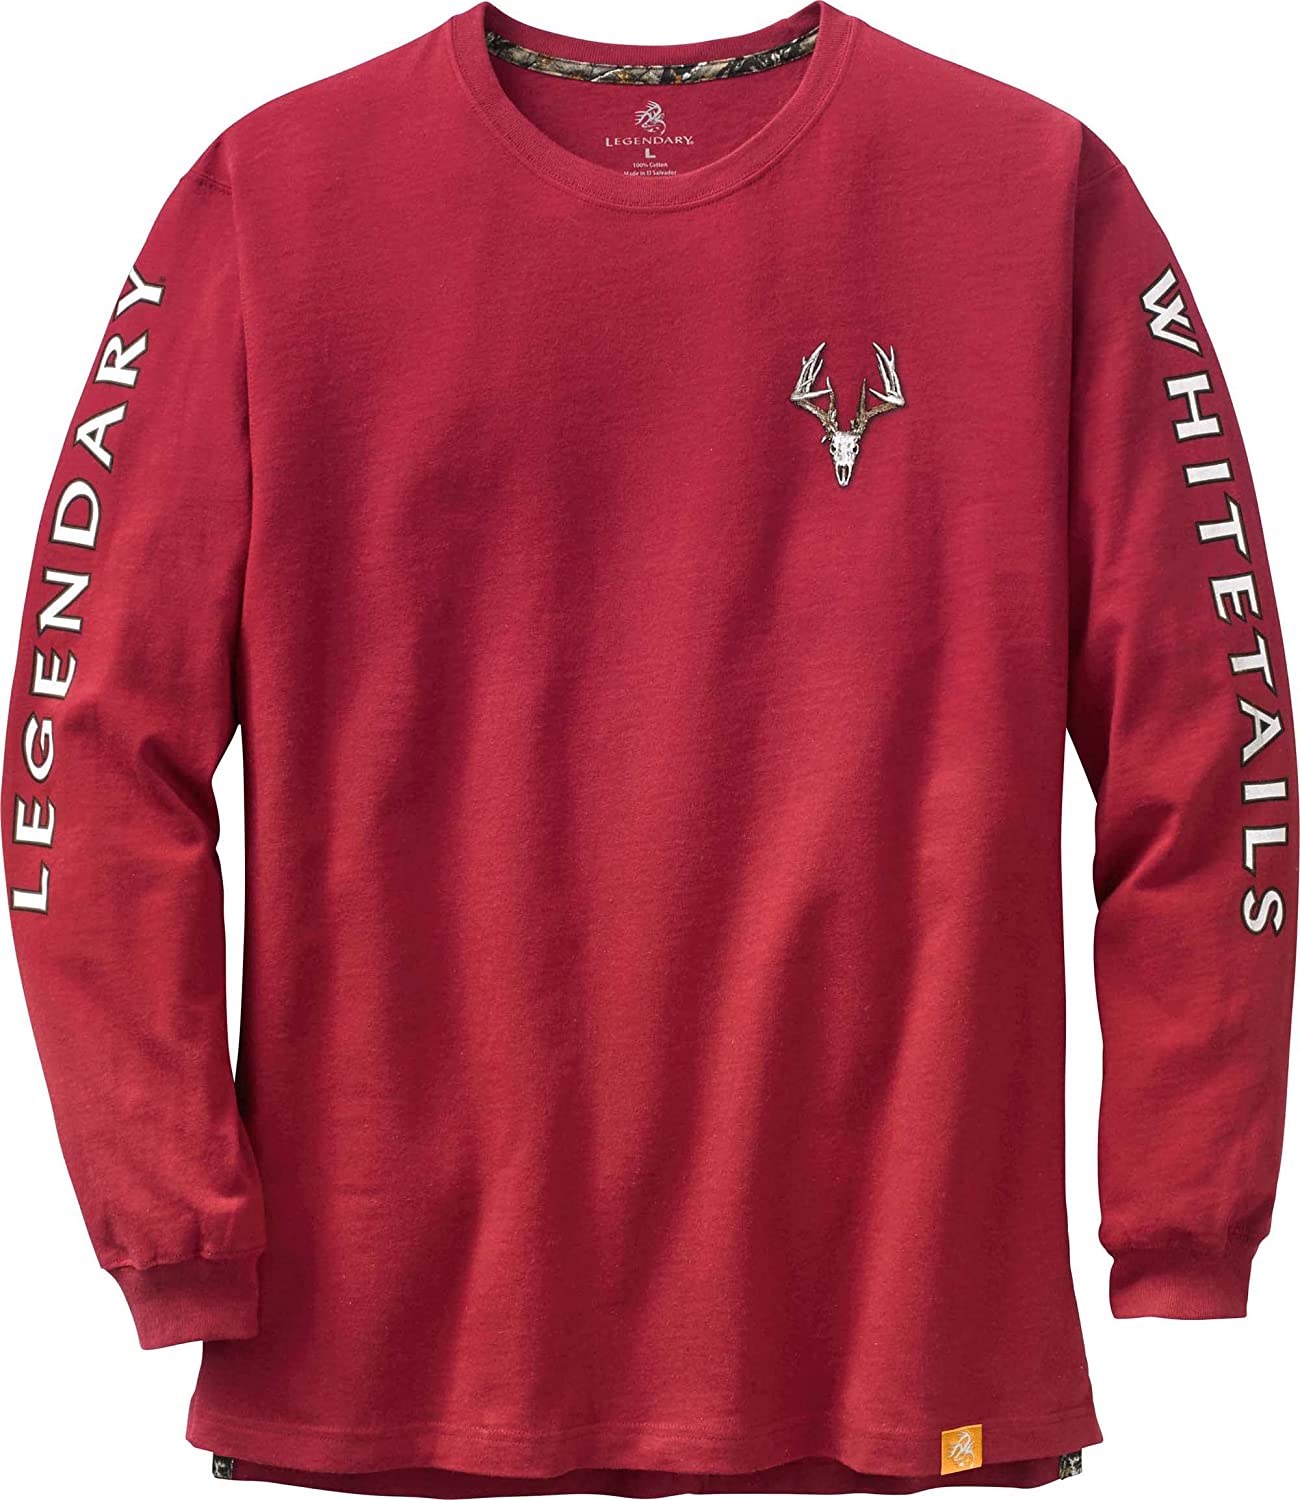 Legendary Whitetails Mens Non-Typical Series Long Sleeve T-Shirt